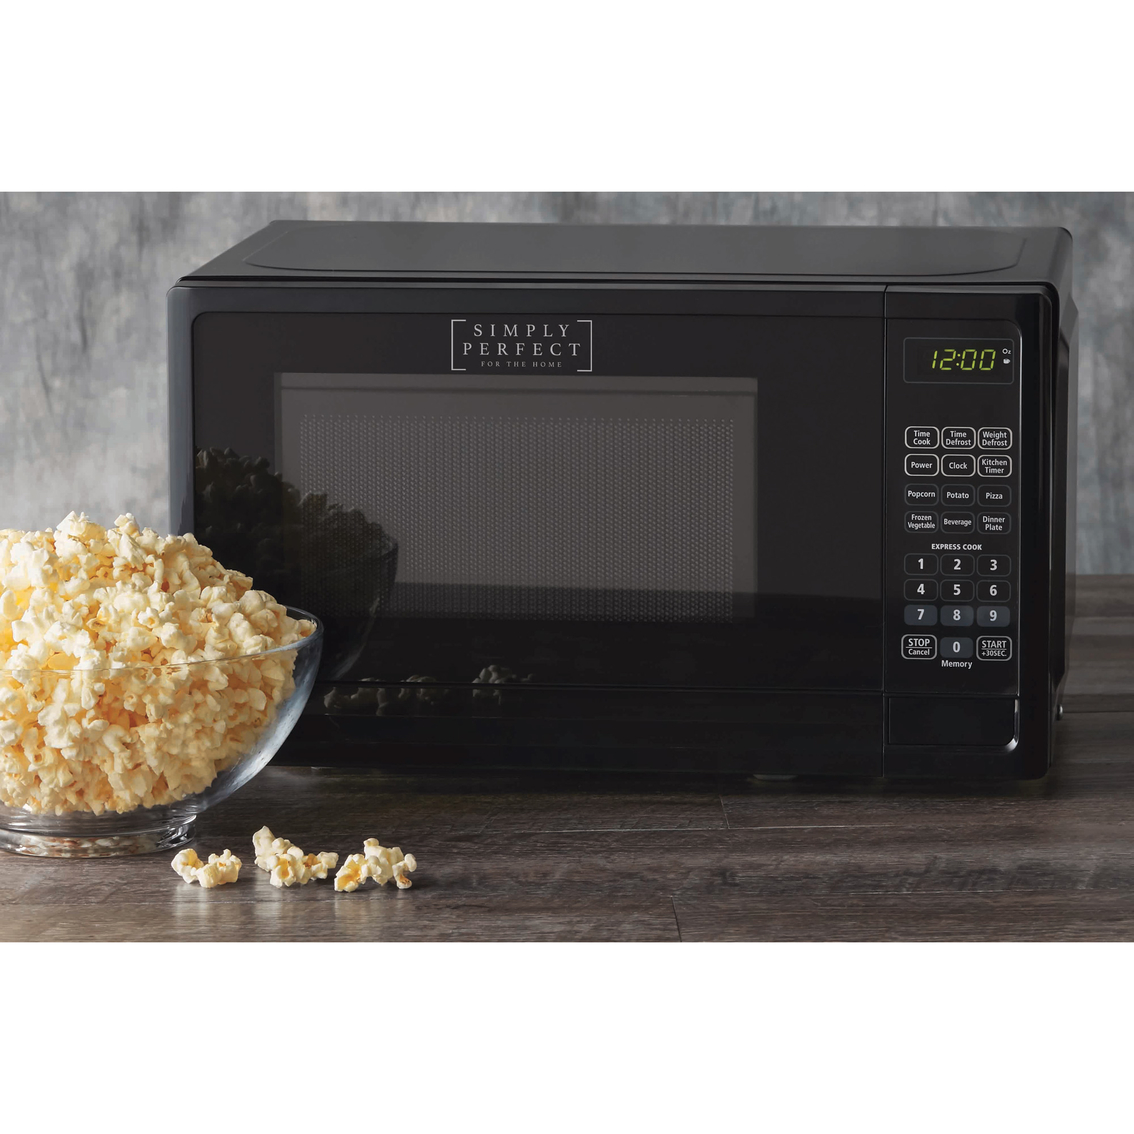 Simply Perfect 0.7 Cu. Ft. Microwave Oven Black - Image 2 of 2